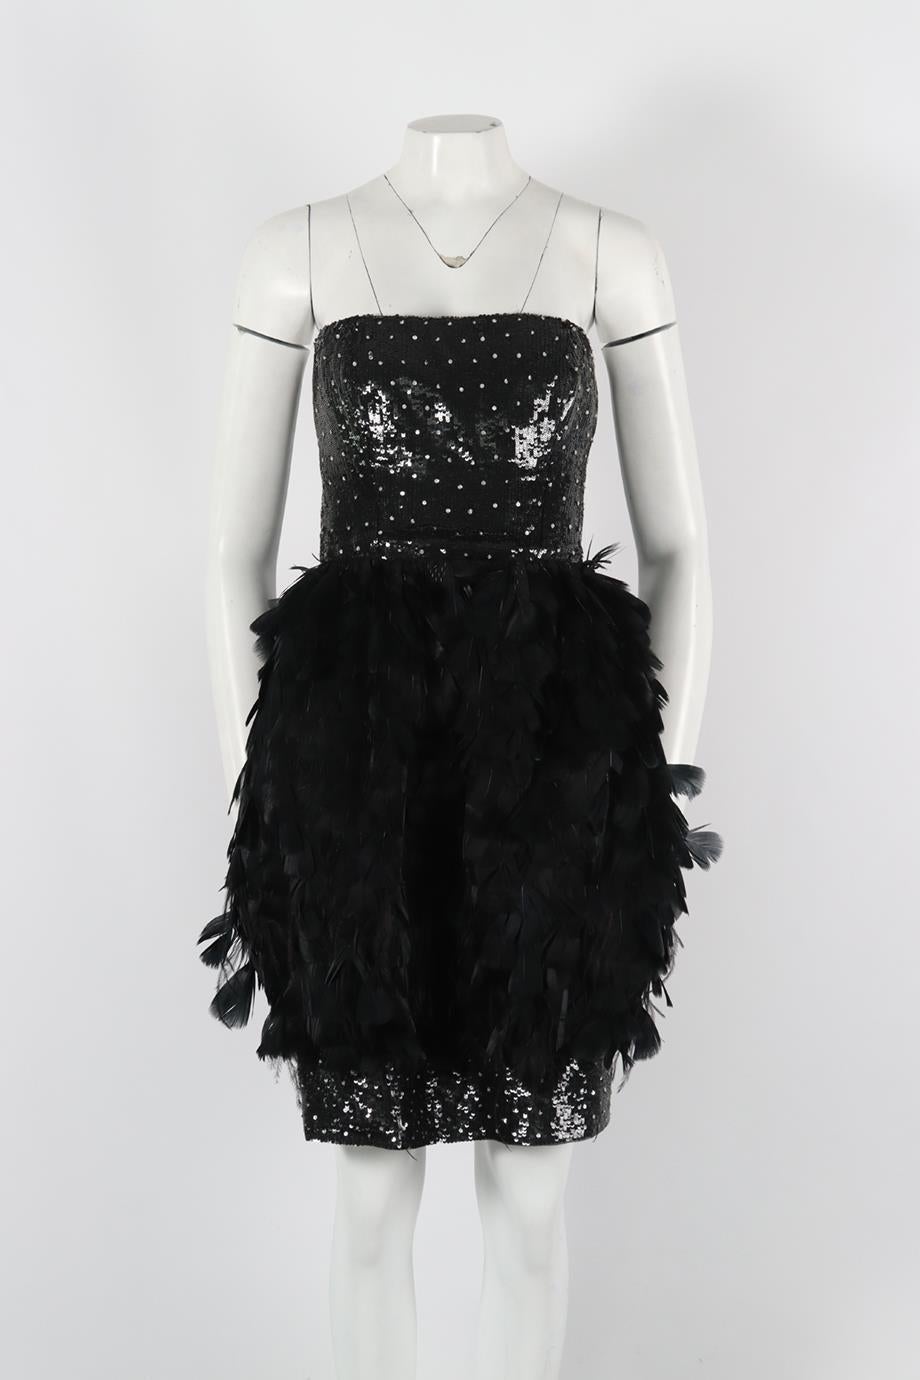 Oscar De La Renta Feather Trimmed Sequinned Silk Dress. Black. Sleeveless. Bandeau. Zip fastening - Back. 100% Silk. US 6 (UK 10, FR 38, IT 42). Bust: 32.4 in. Waist: 28 in. Hips: 36.2 in. Length: 31.7 in. Condition: Used. Fair condition - Signs of